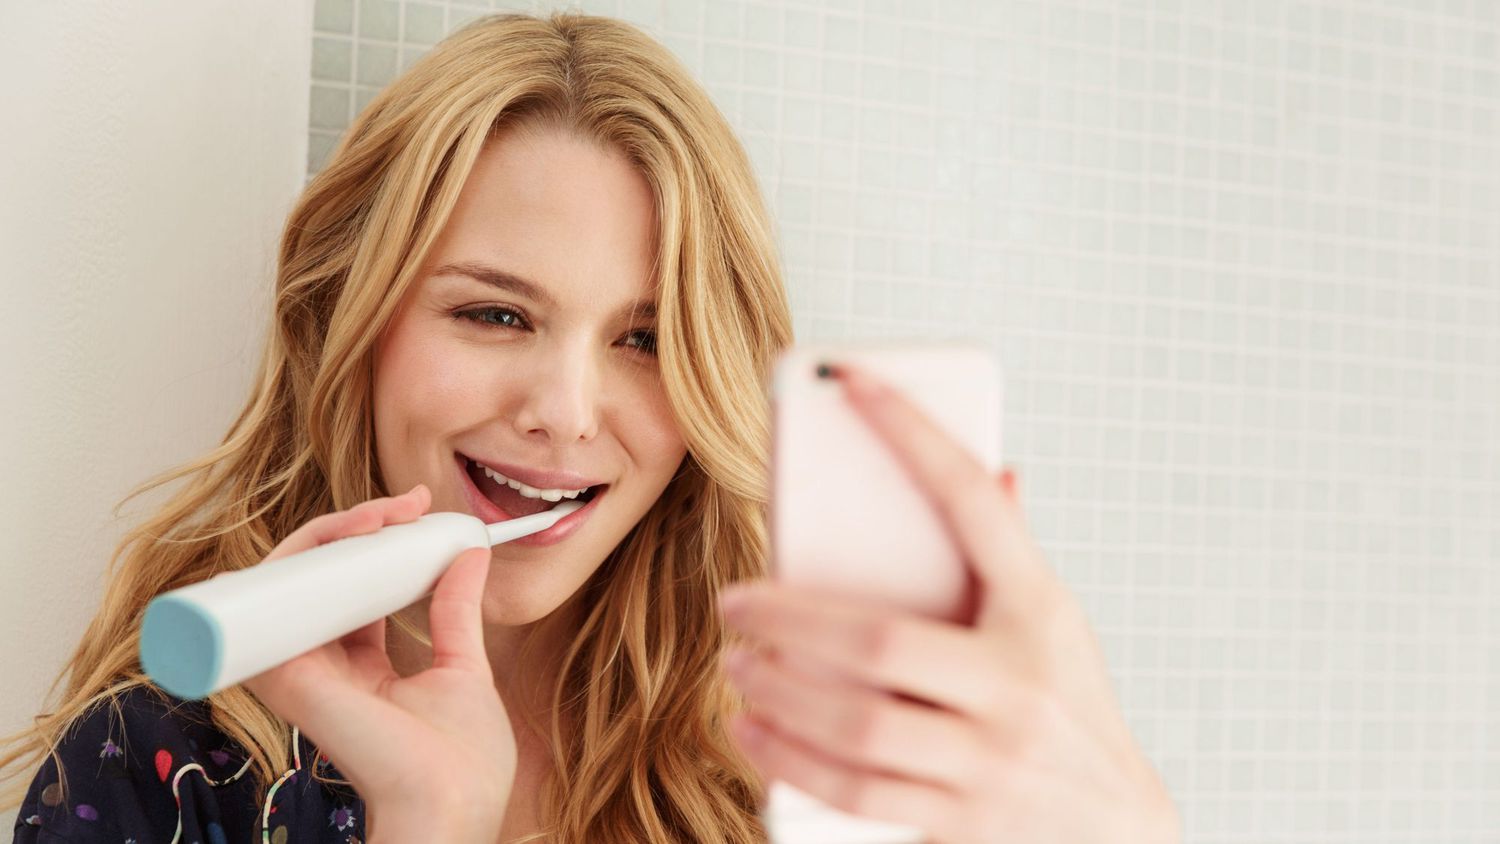 How To Change Mode On Oral-B Toothbrush